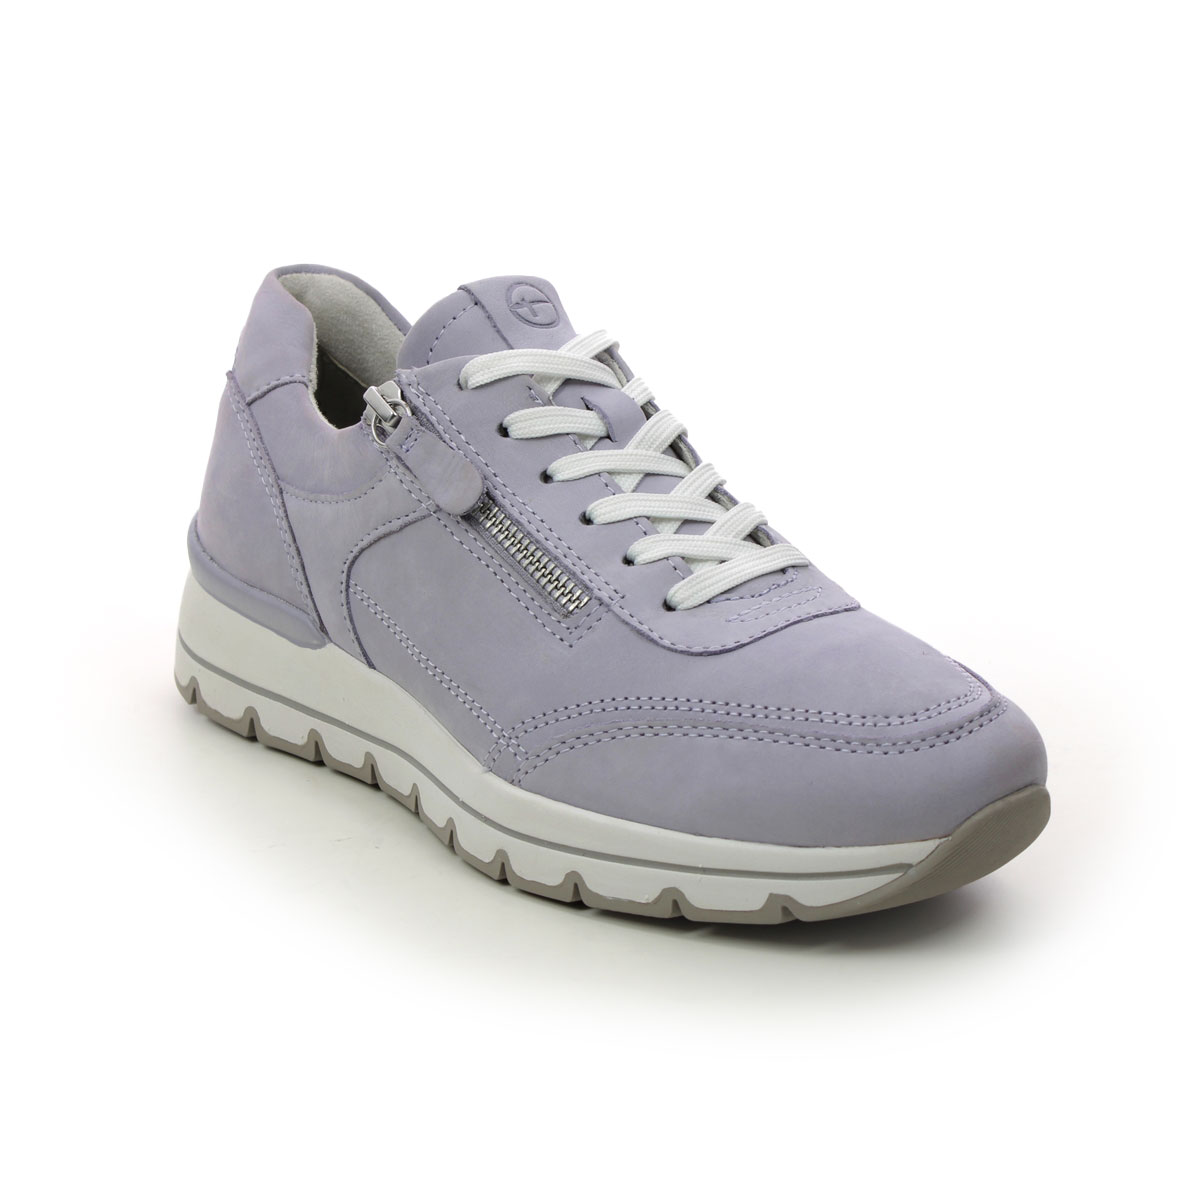 Tamaris Vinnie Zip Lilac Womens Trainers 23725-30-543 In Size 36 In Plain Lilac